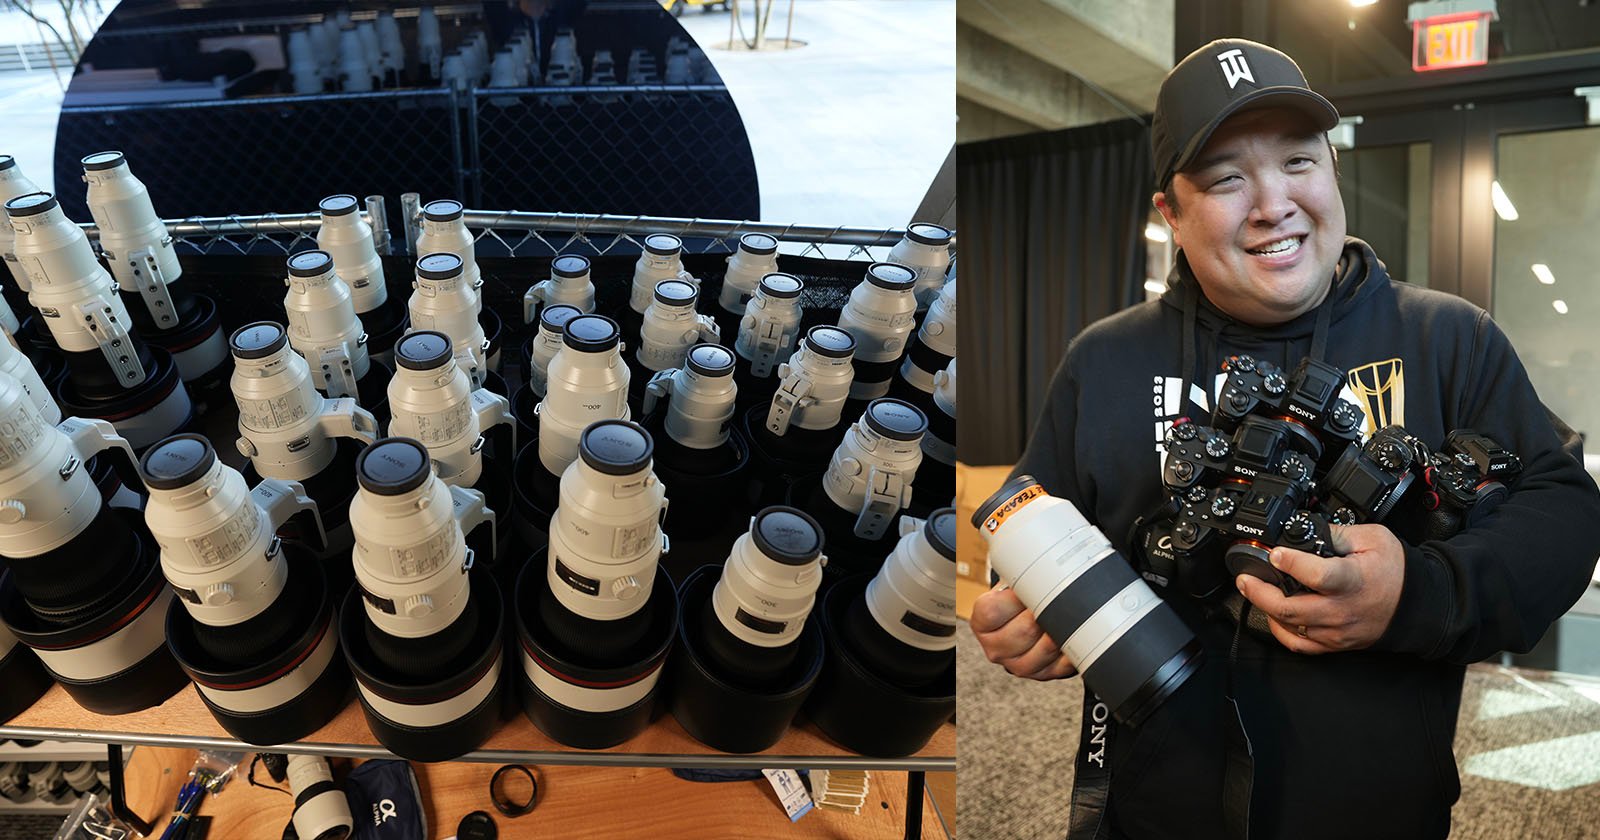 A Look at How Sony Equipped Photographers for Super Bowl LVIII